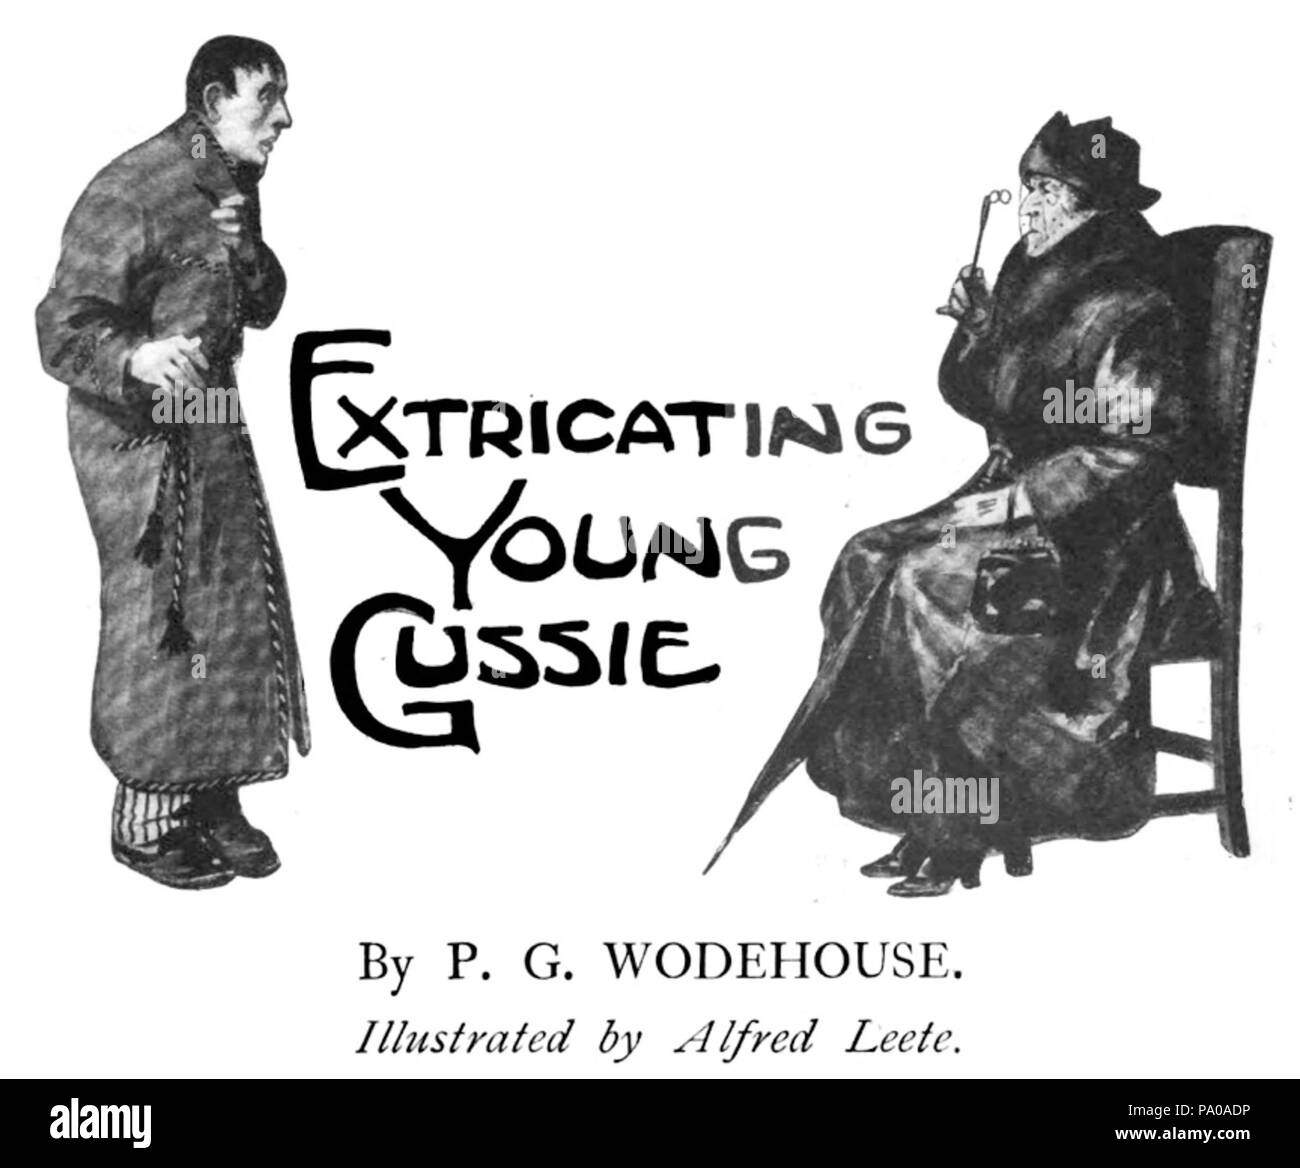 634 Extricating Young Gussie title illustration Stock Photo